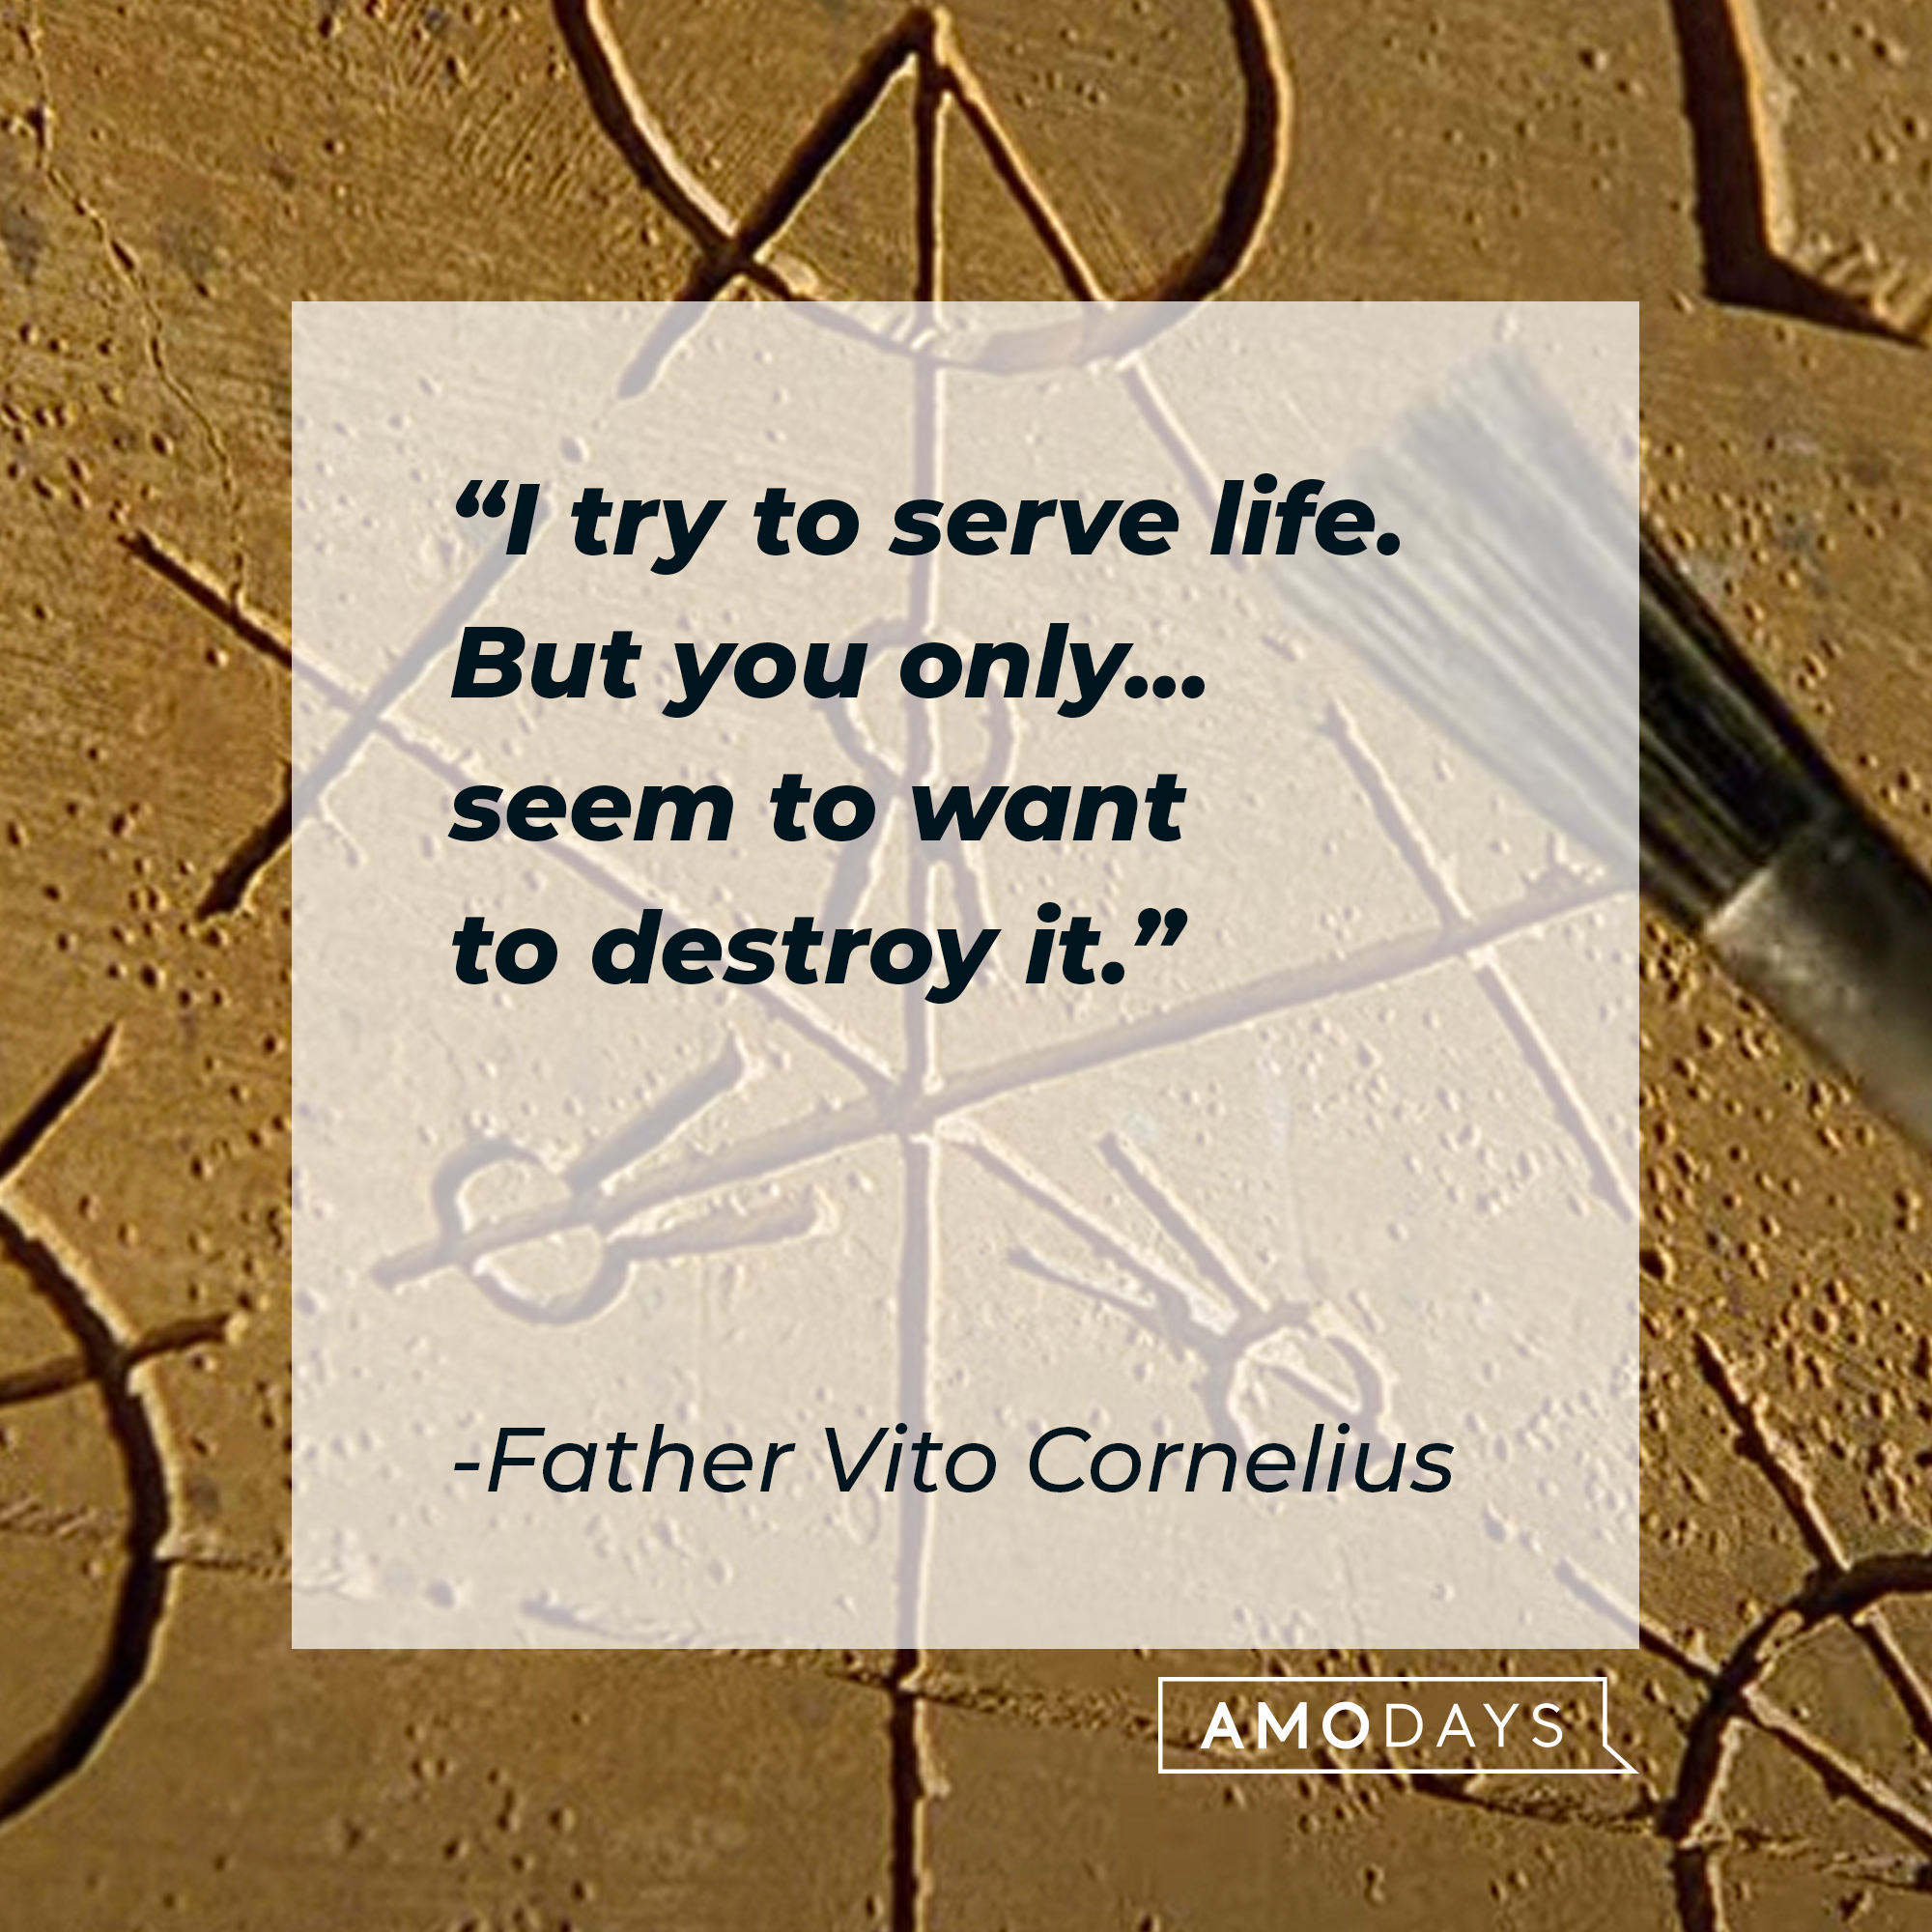 Father Vito Cornelius's quote: "I try to serve life. But you only... seem to want to destroy it." | Source: youtube.com/sonypictures